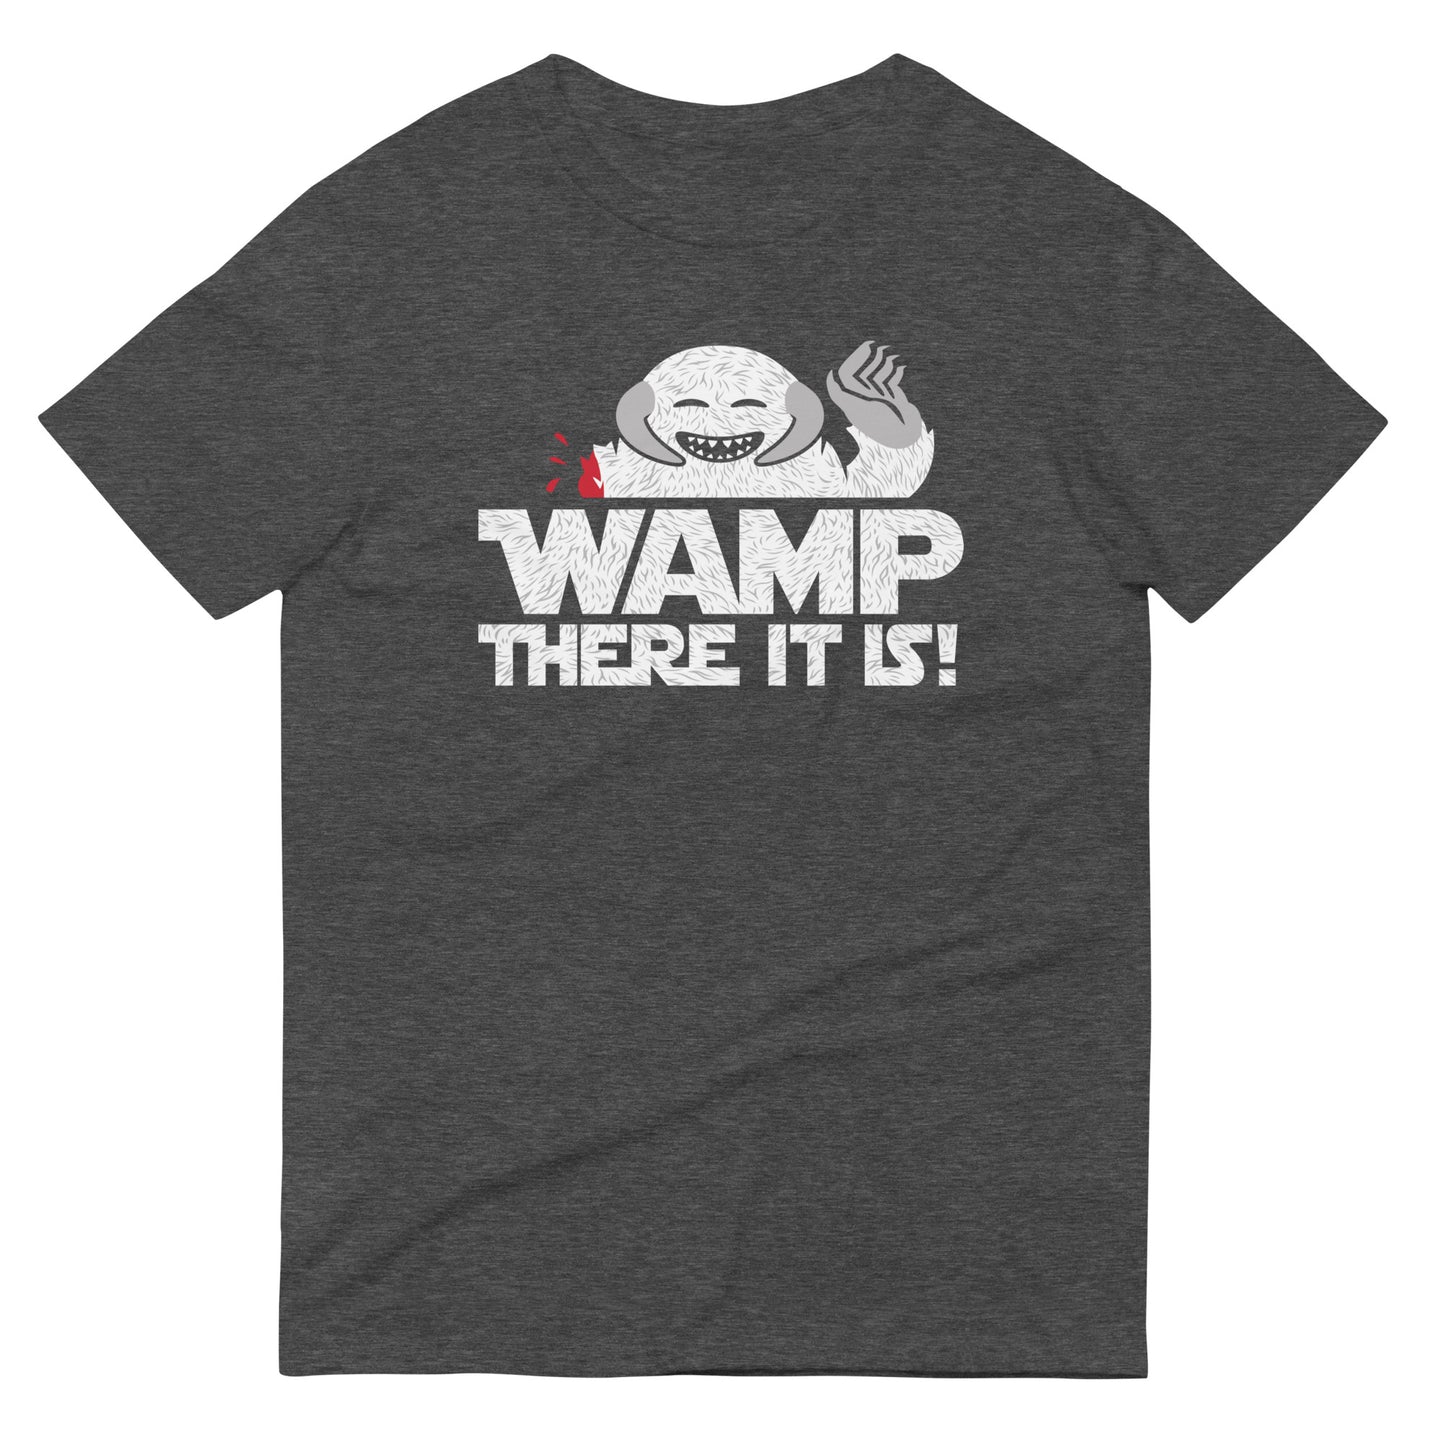 Wamp There It Is Men's Signature Tee